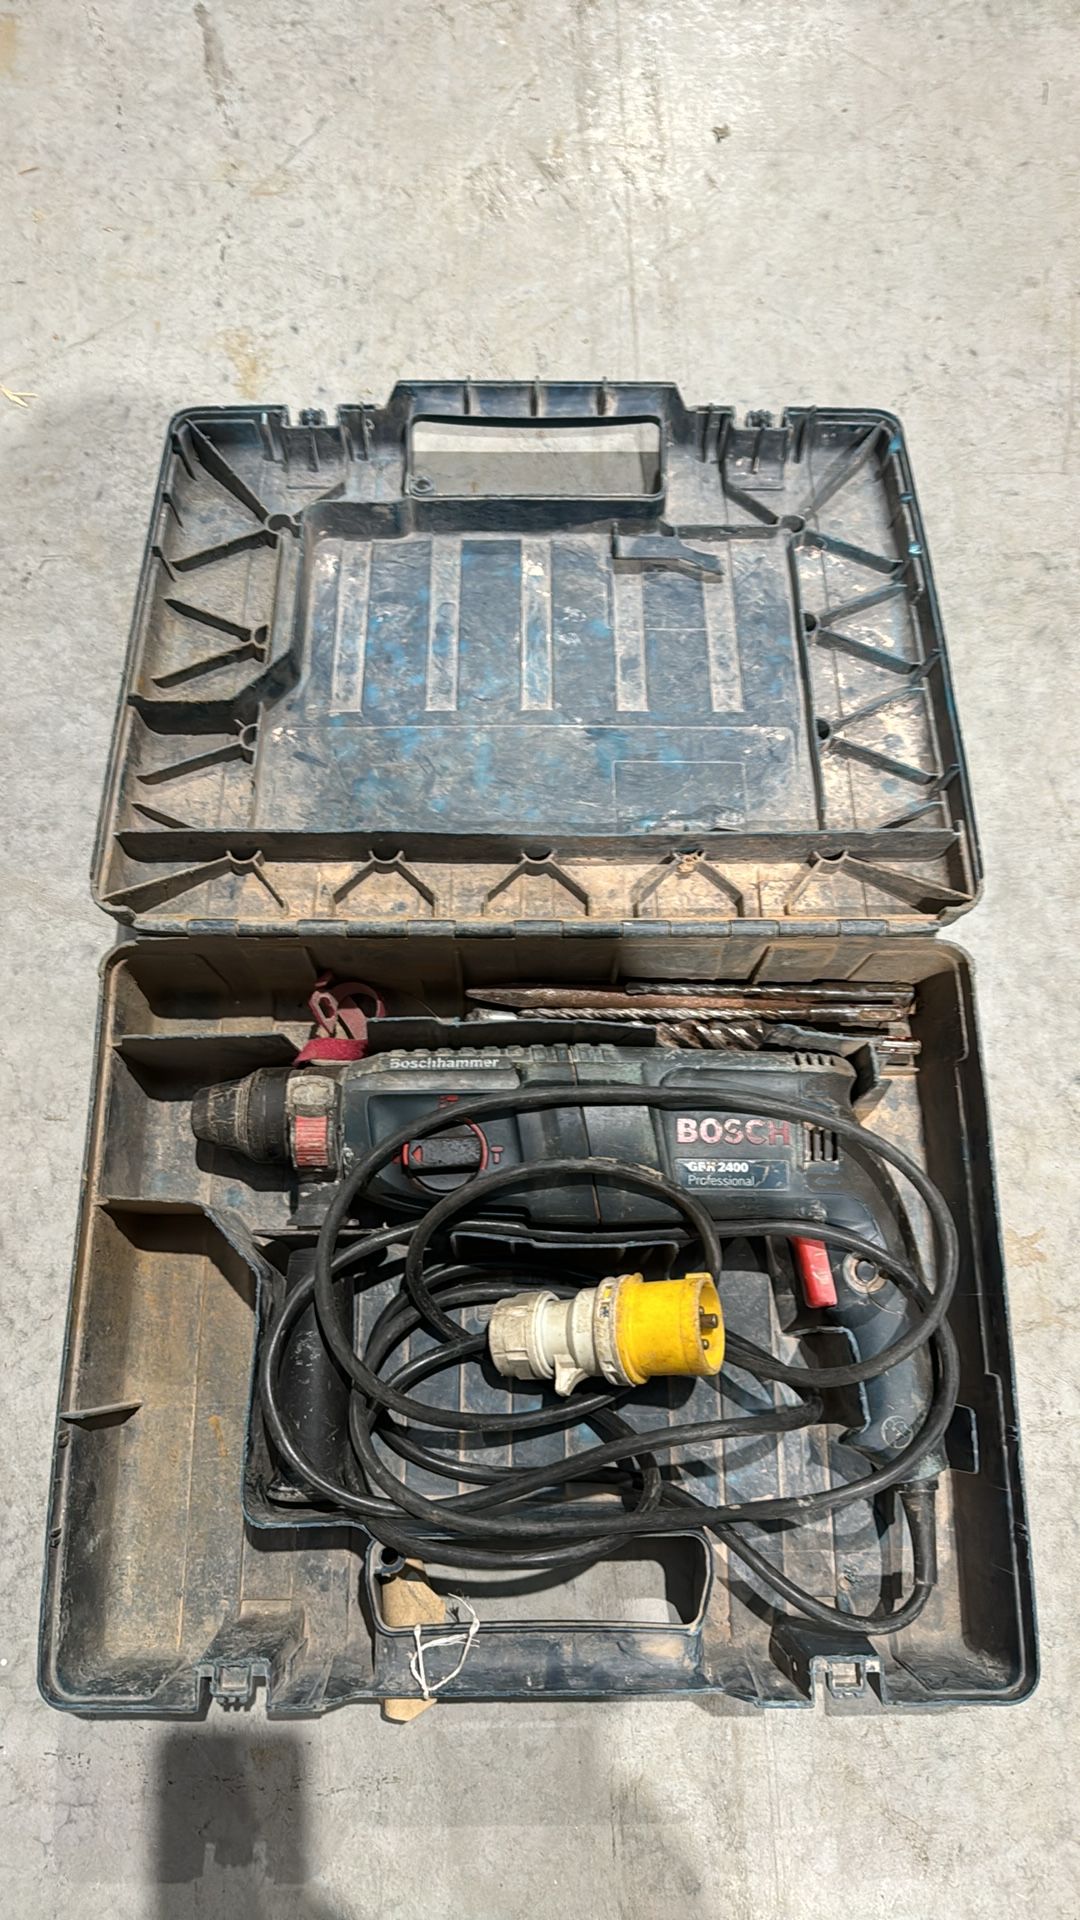 BOSCH GBH 2400 Professional Impact Drill / Driver - NO RESERVE - Image 2 of 3